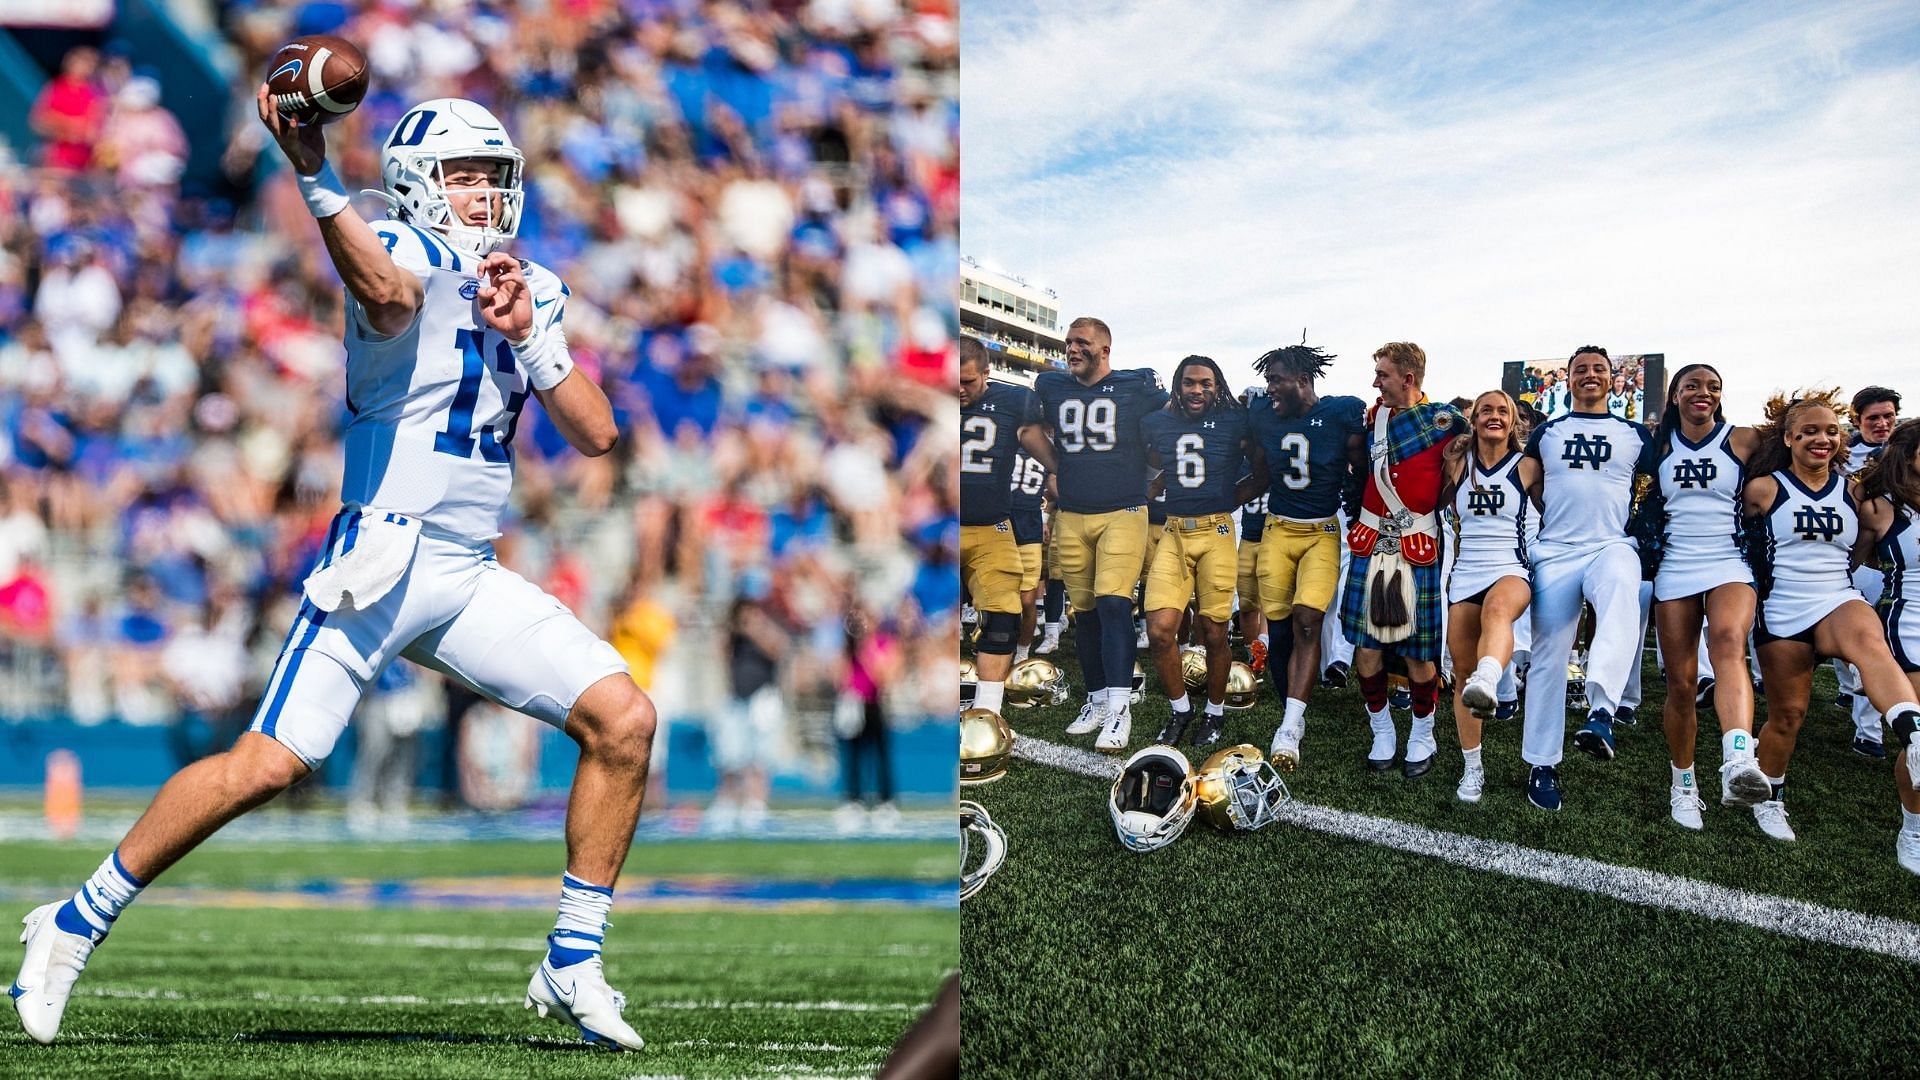 Picture Sources: @DukeFootball, @NDFootball (X)